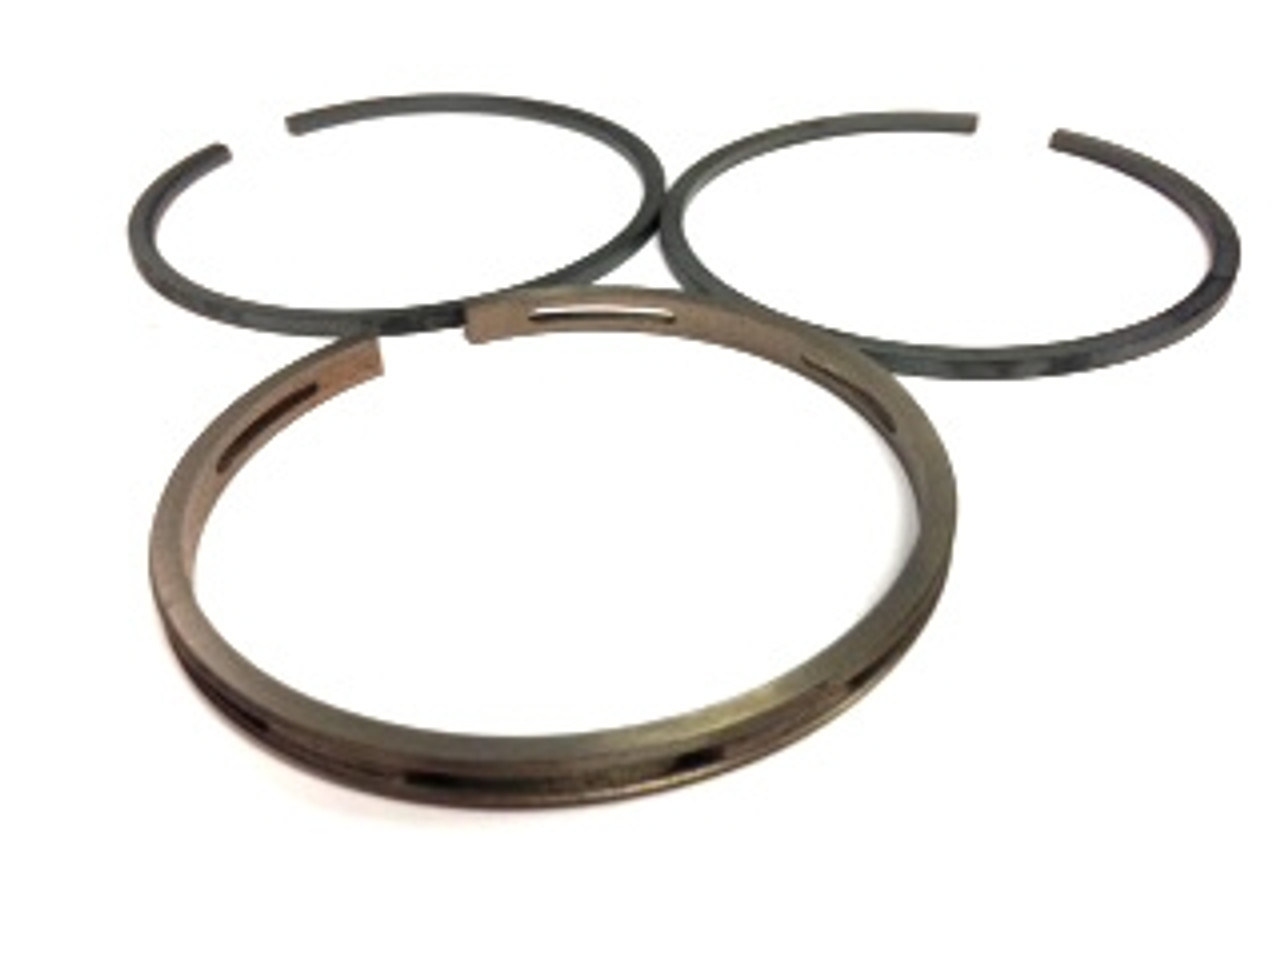 New Briggs And Stratton OEM Ring Set-020 Part Number 791324